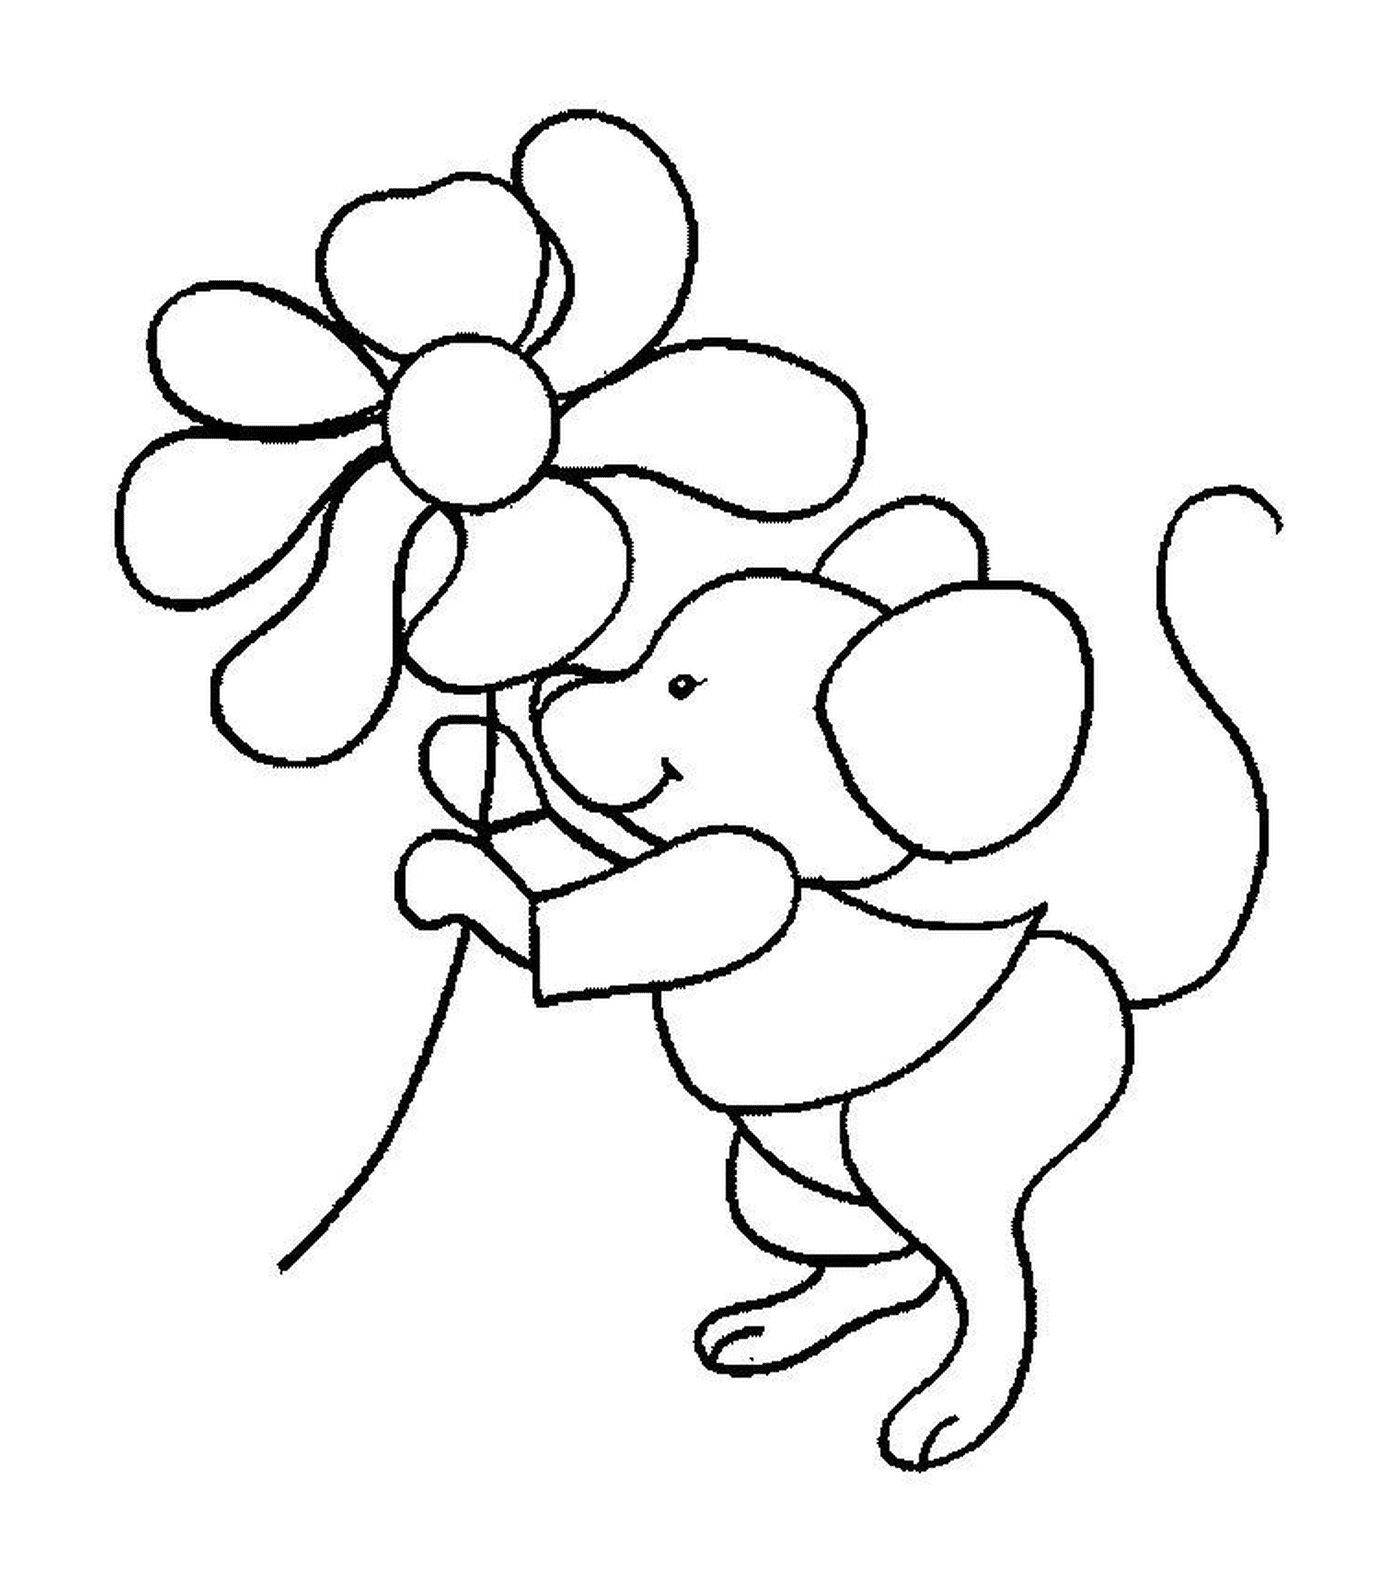  A mouse holding a flower 